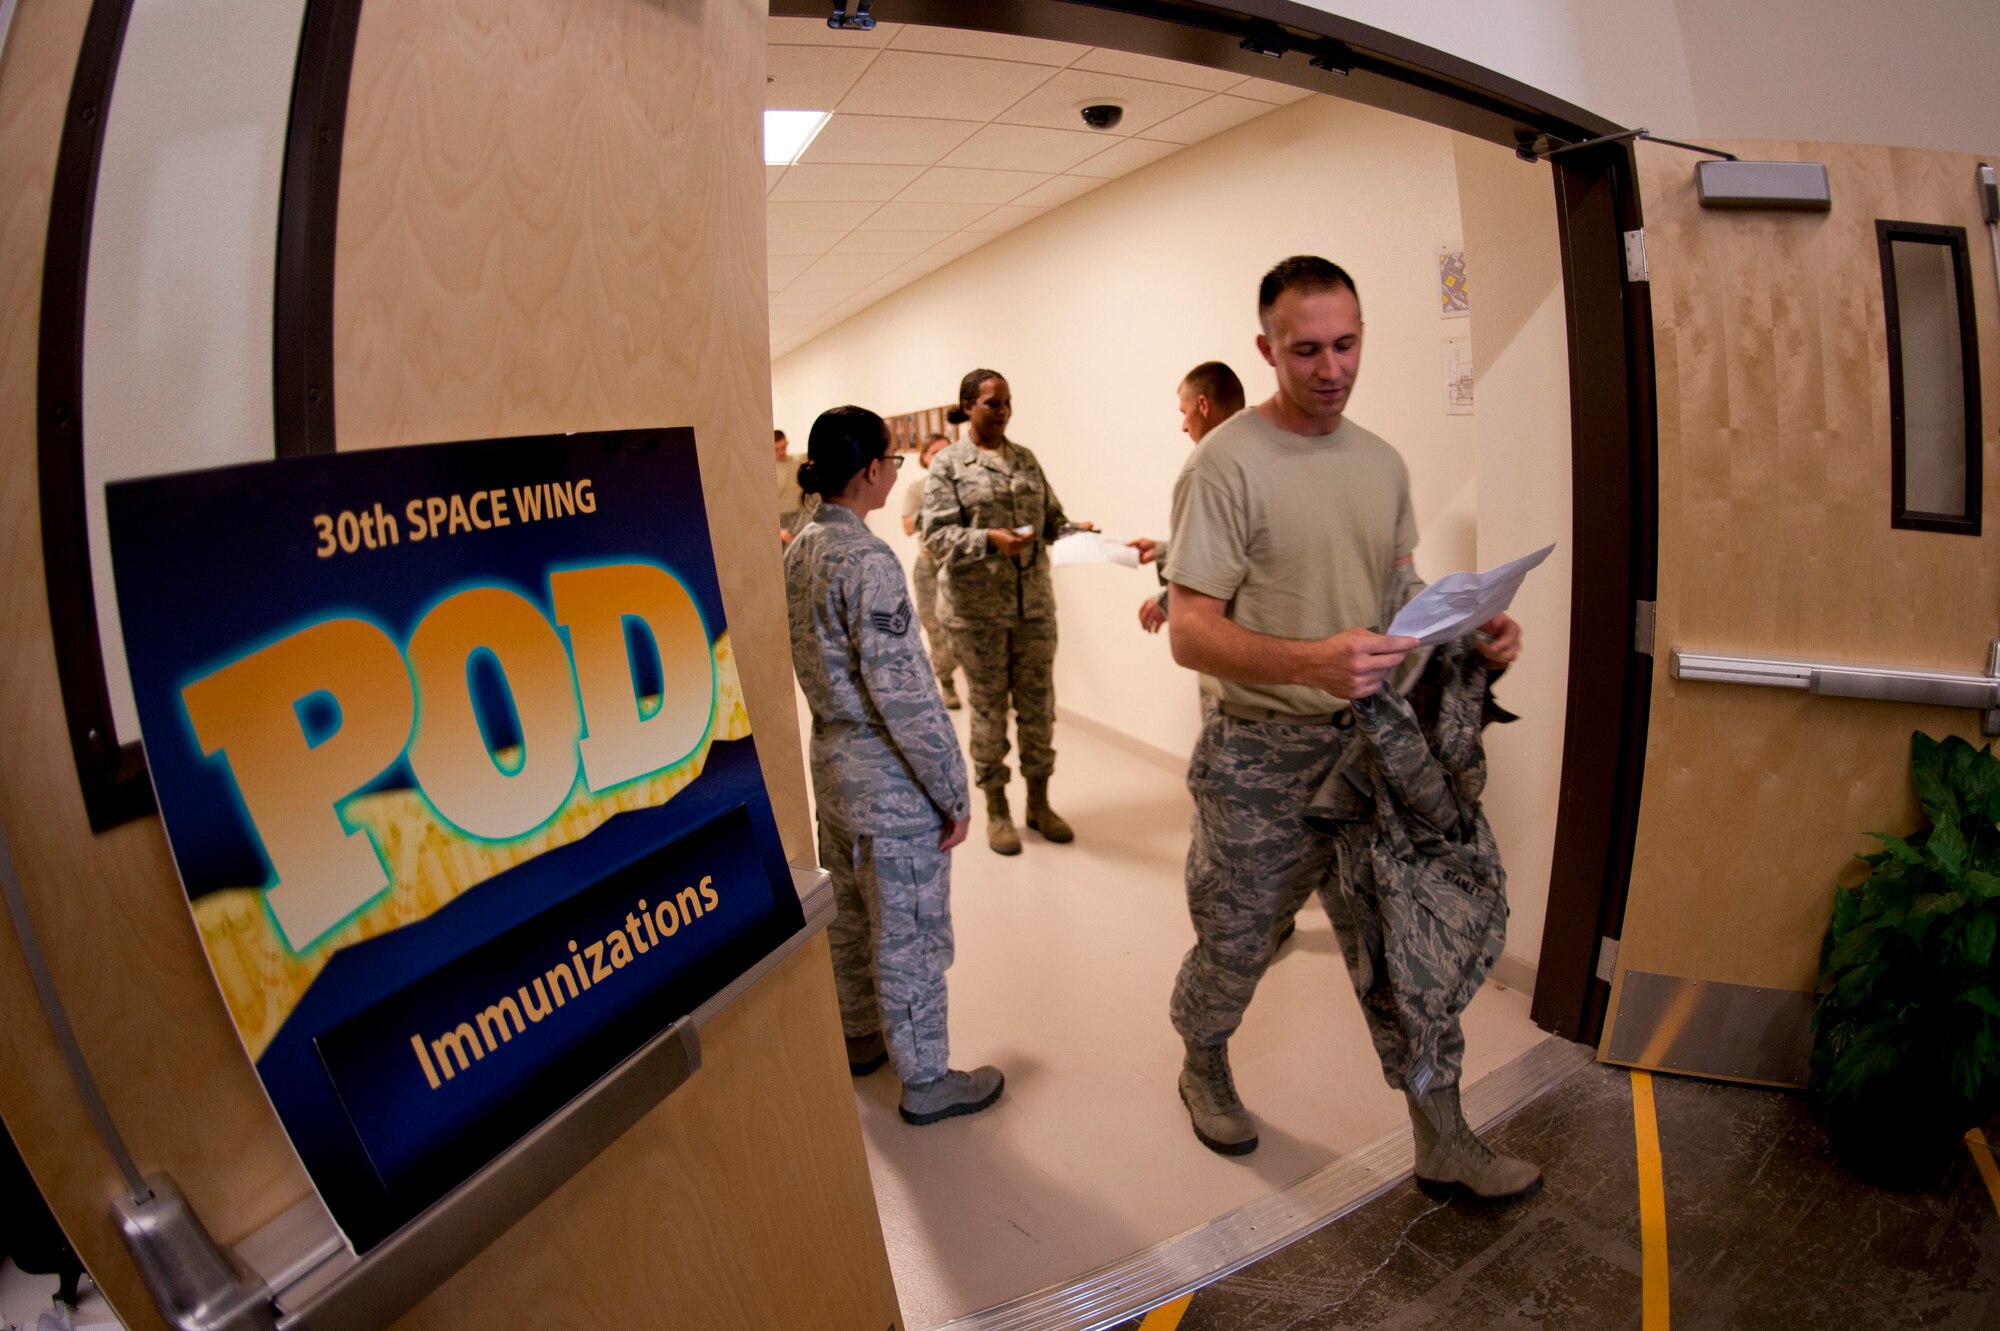 VANDENBERG AIR FORCE BASE, Calif. – After a quick medical records screening, Team V members proceed to the inoculation area at the Point of Distribution (POD) in the Installation Deployment Readiness Cell here Thursday, Oct. 18, 2012. Active duty Airmen reported to the POD in an exercise simulating mass immunization against anthrax, and base authorities used the opportunity to distribute this year’s real world influenza vaccine.  The POD distributed Skittles candy representing the anthrax prophylaxis to over 1,900 Airmen and then vaccinated over 1,500 Airmen for influenza, raising the wing’s flu vaccination rate to over 90%.  The purpose of the exercise was toevaluate the wing’s response to a public health emergency by testing the 30th Medical Group’s ability to stand up a POD and rapidly distribute countermeasures. Mass inoculation of this scale was a first for Vandenberg Air Force Base. (U.S. Air Force photo/Senior Airman Lael Huss)